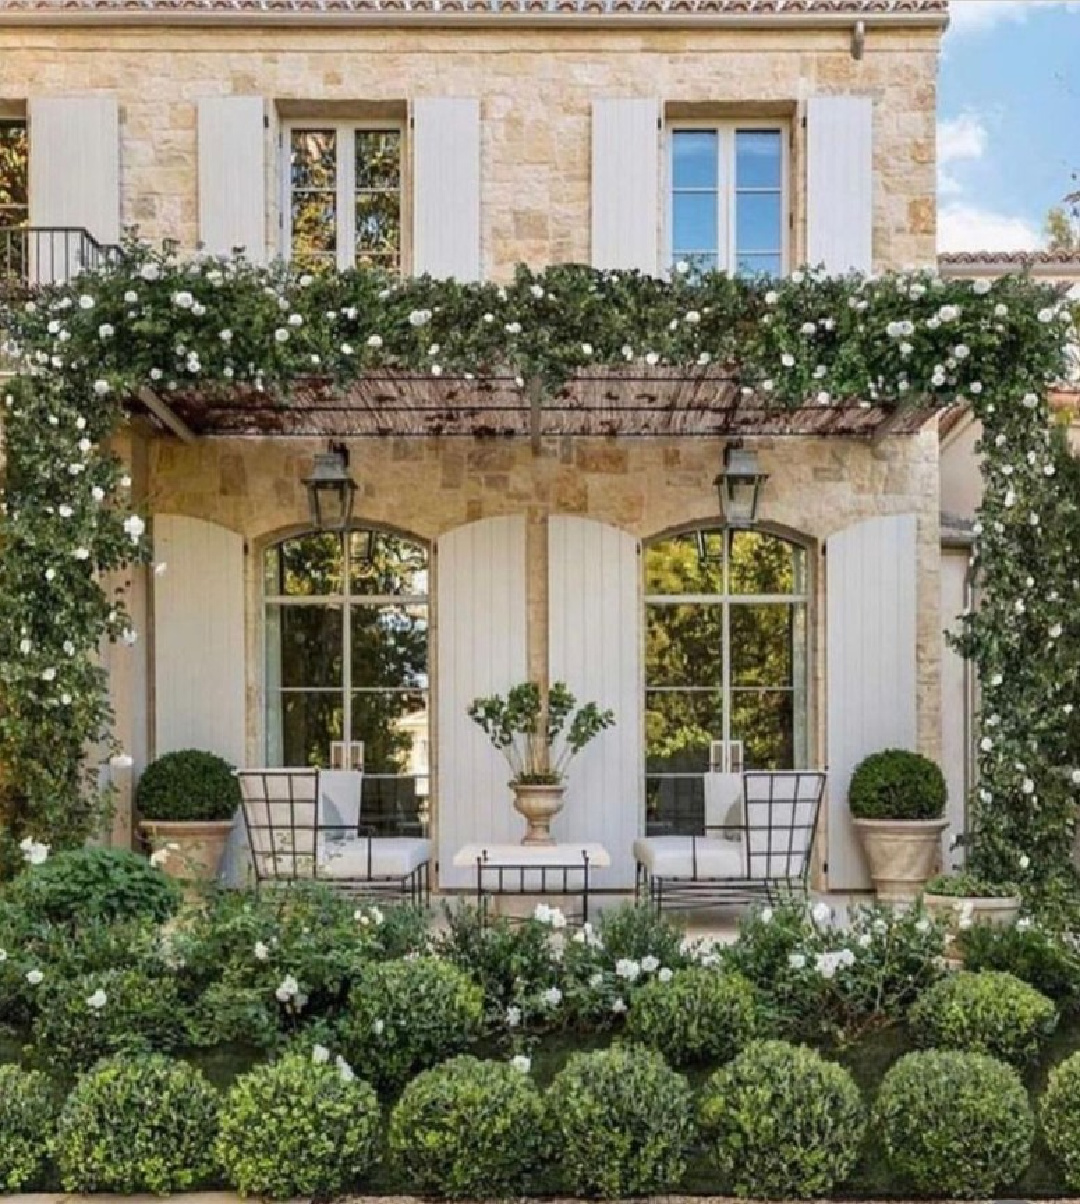 Giannetti Home designed stone French home with shutters and climbing roses looks straight out of Provence! @giannettihome #stevegiannetti #brookegiannetti #patinahomes